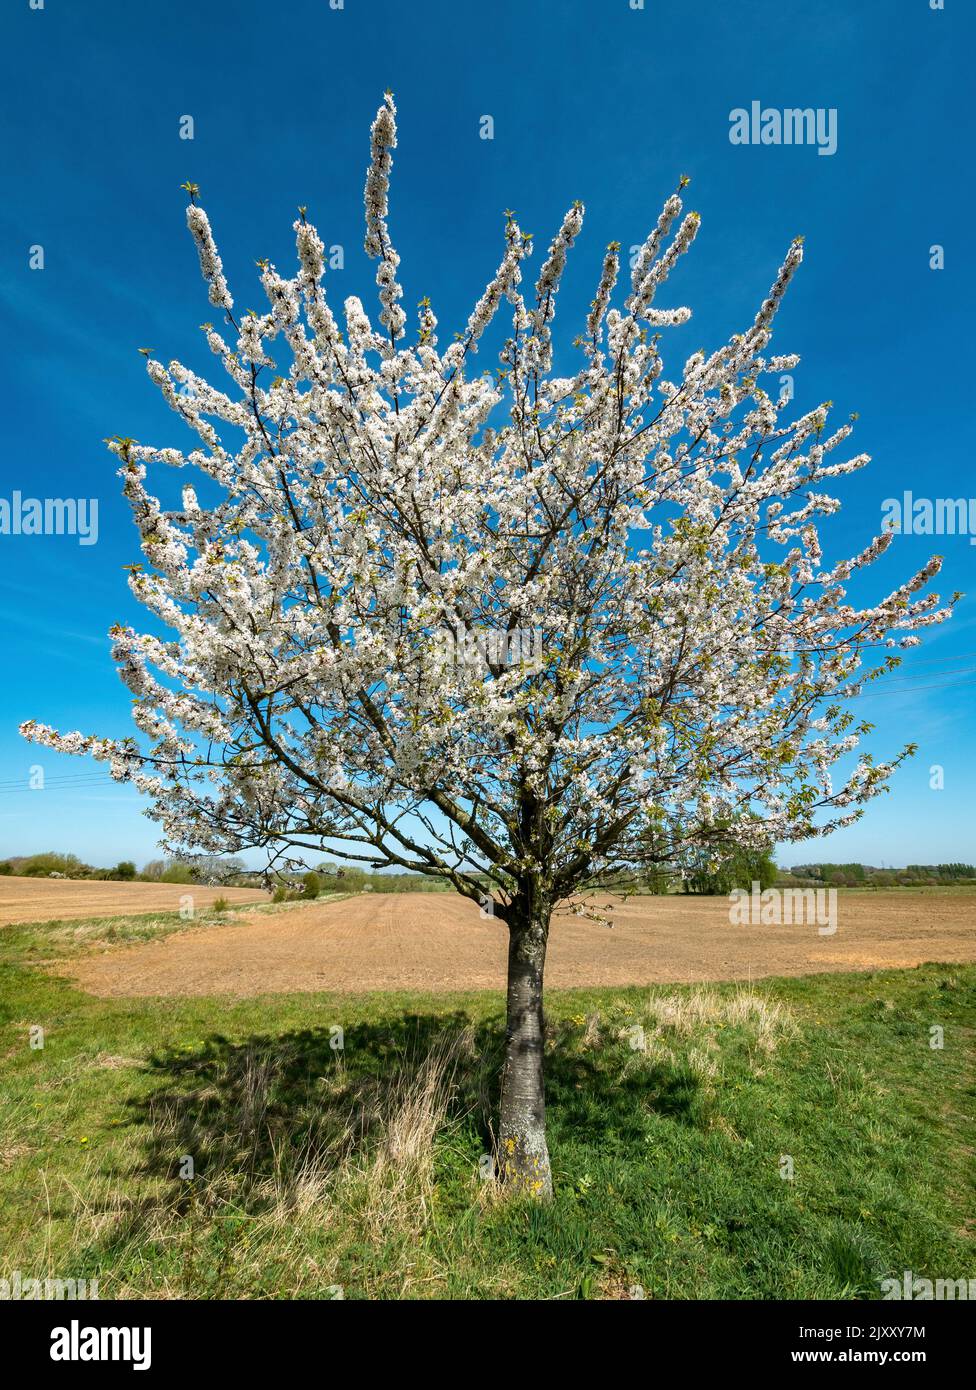 Single cherry tree (Prunus) with white cherry blossom with farm fields and blue sky behind, Leicestershire, UK Stock Photo